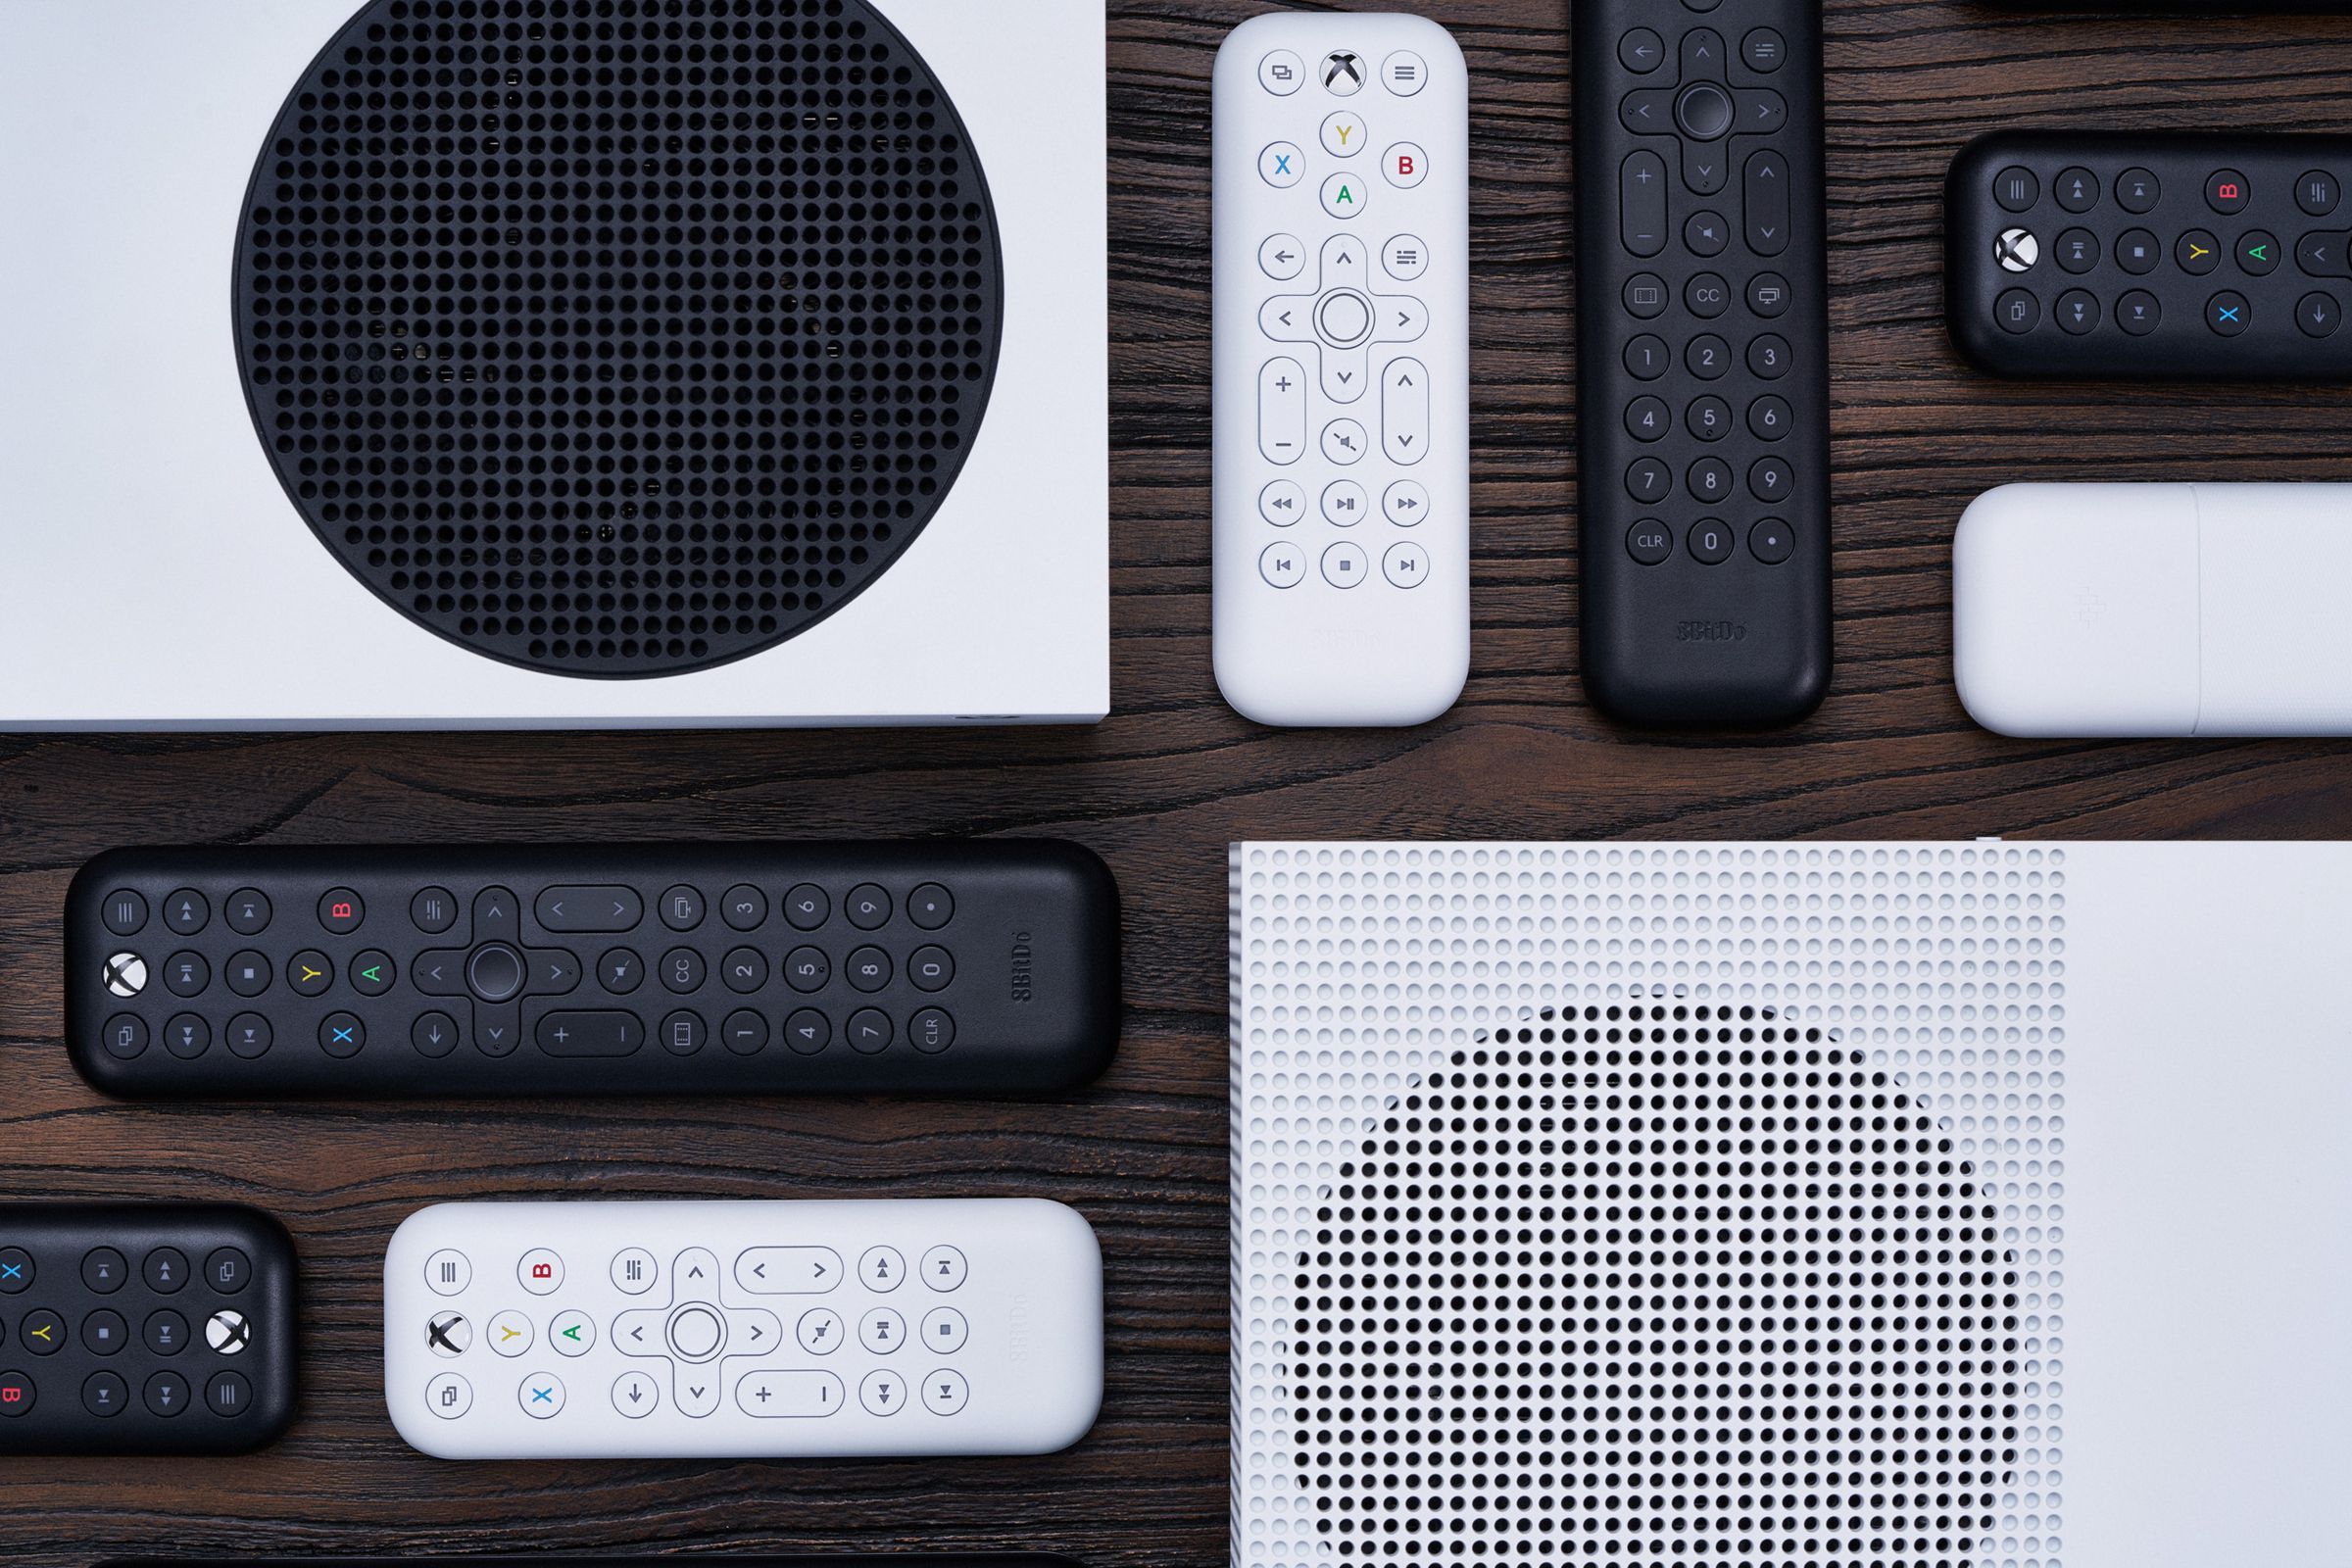 The remotes will ship in September.